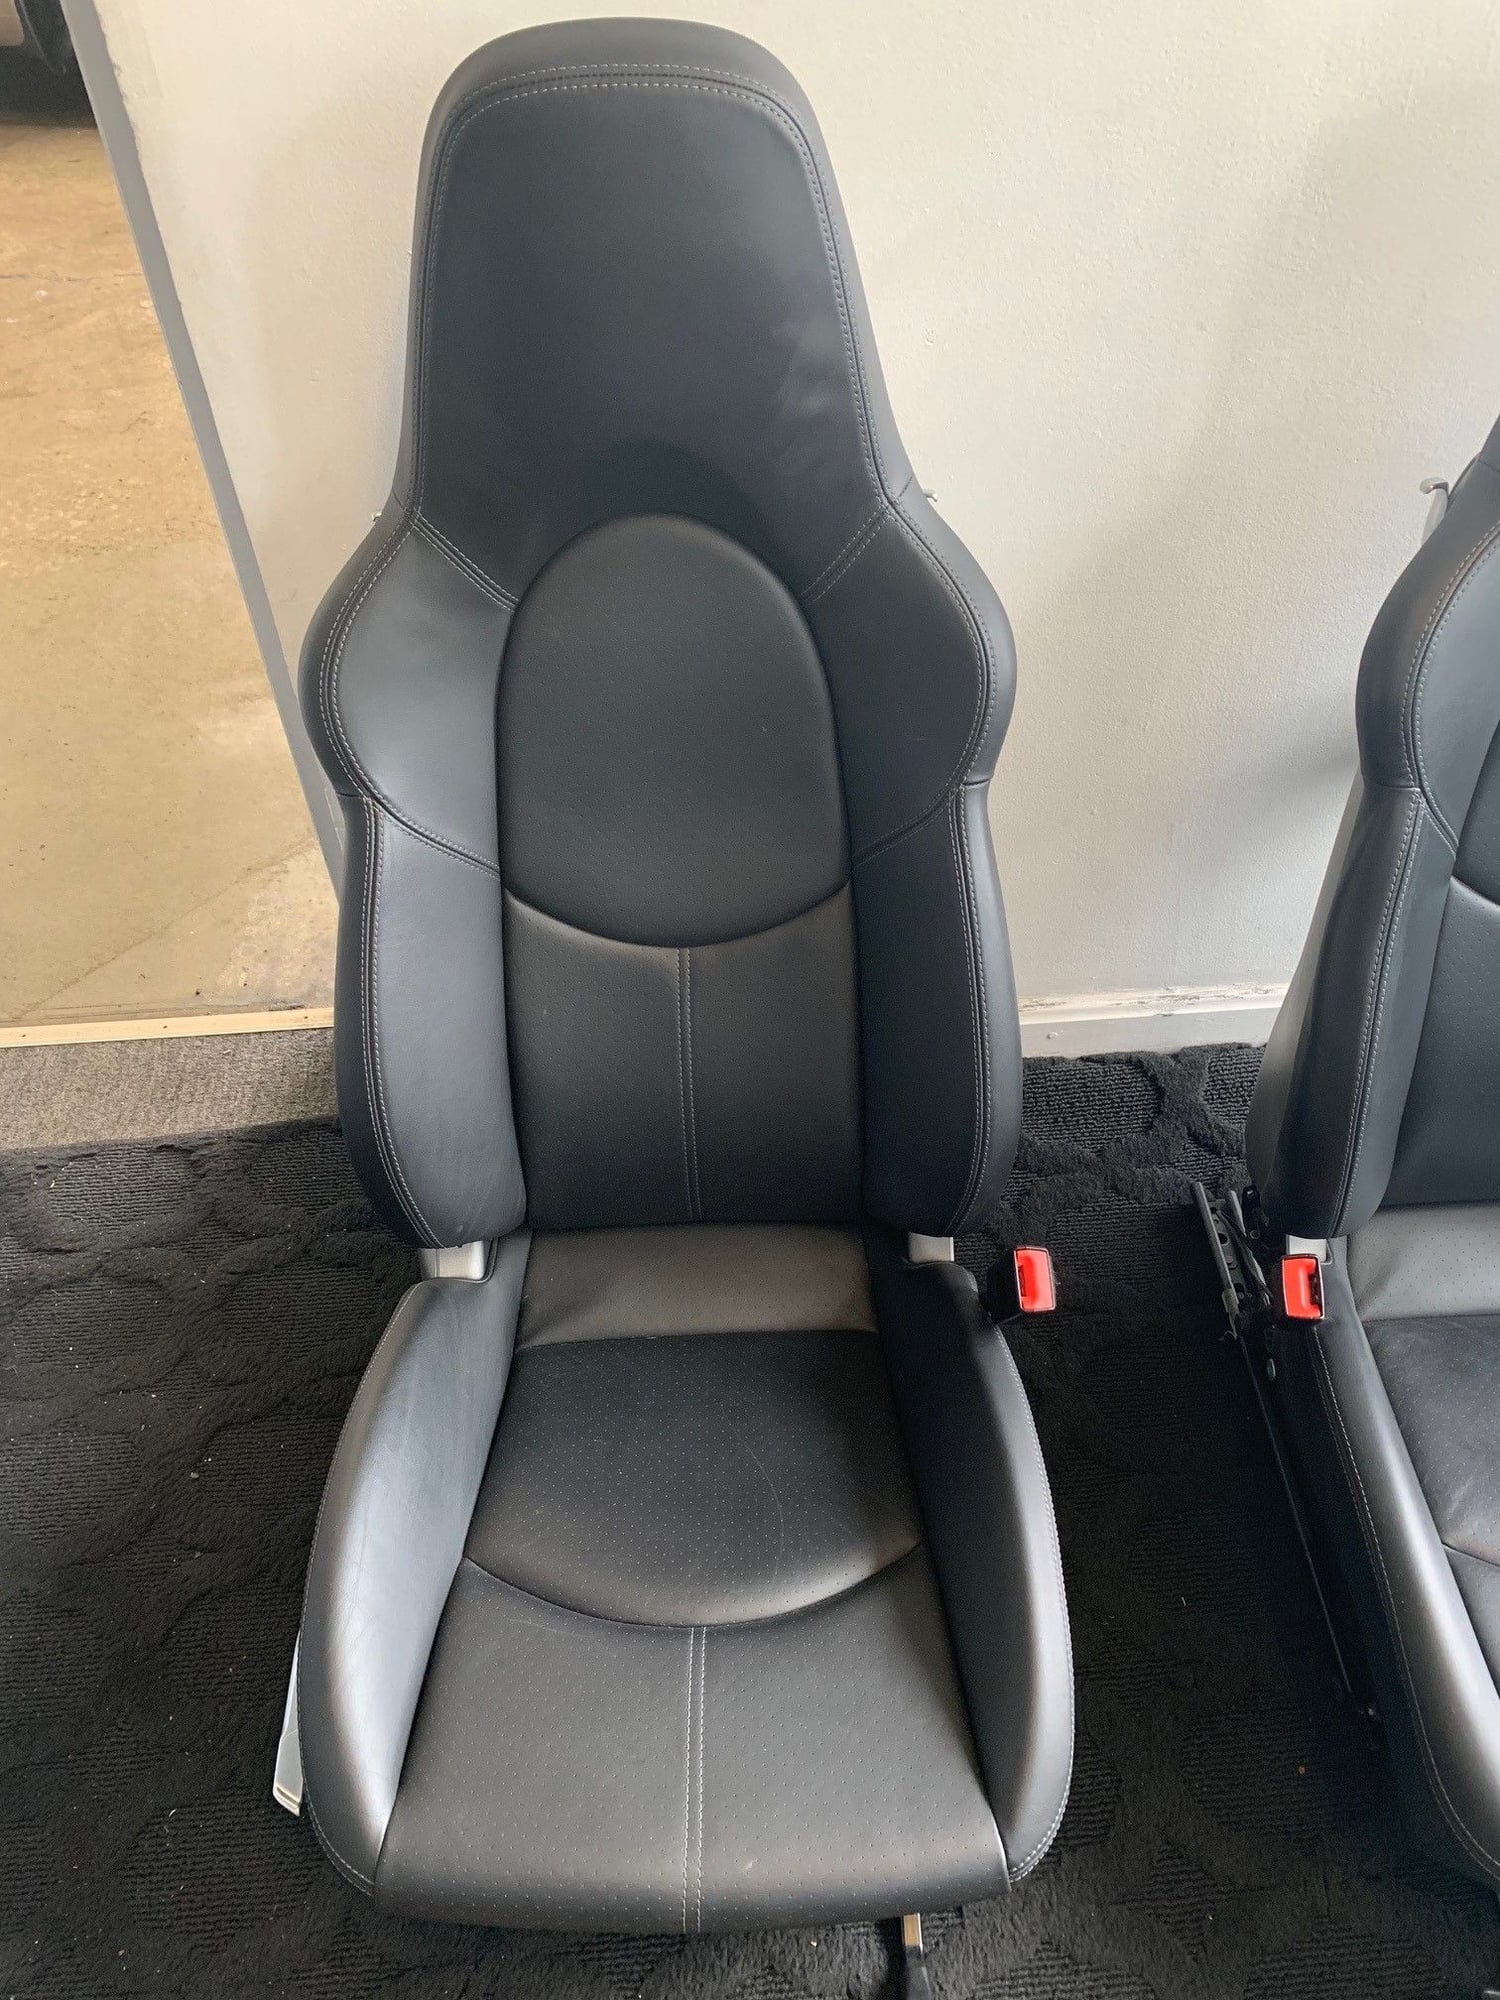 Interior/Upholstery - Porsche Sport Seat - 987 - Used - 2009 to 2012 Porsche Cayman - Natick, MA 01760, United States